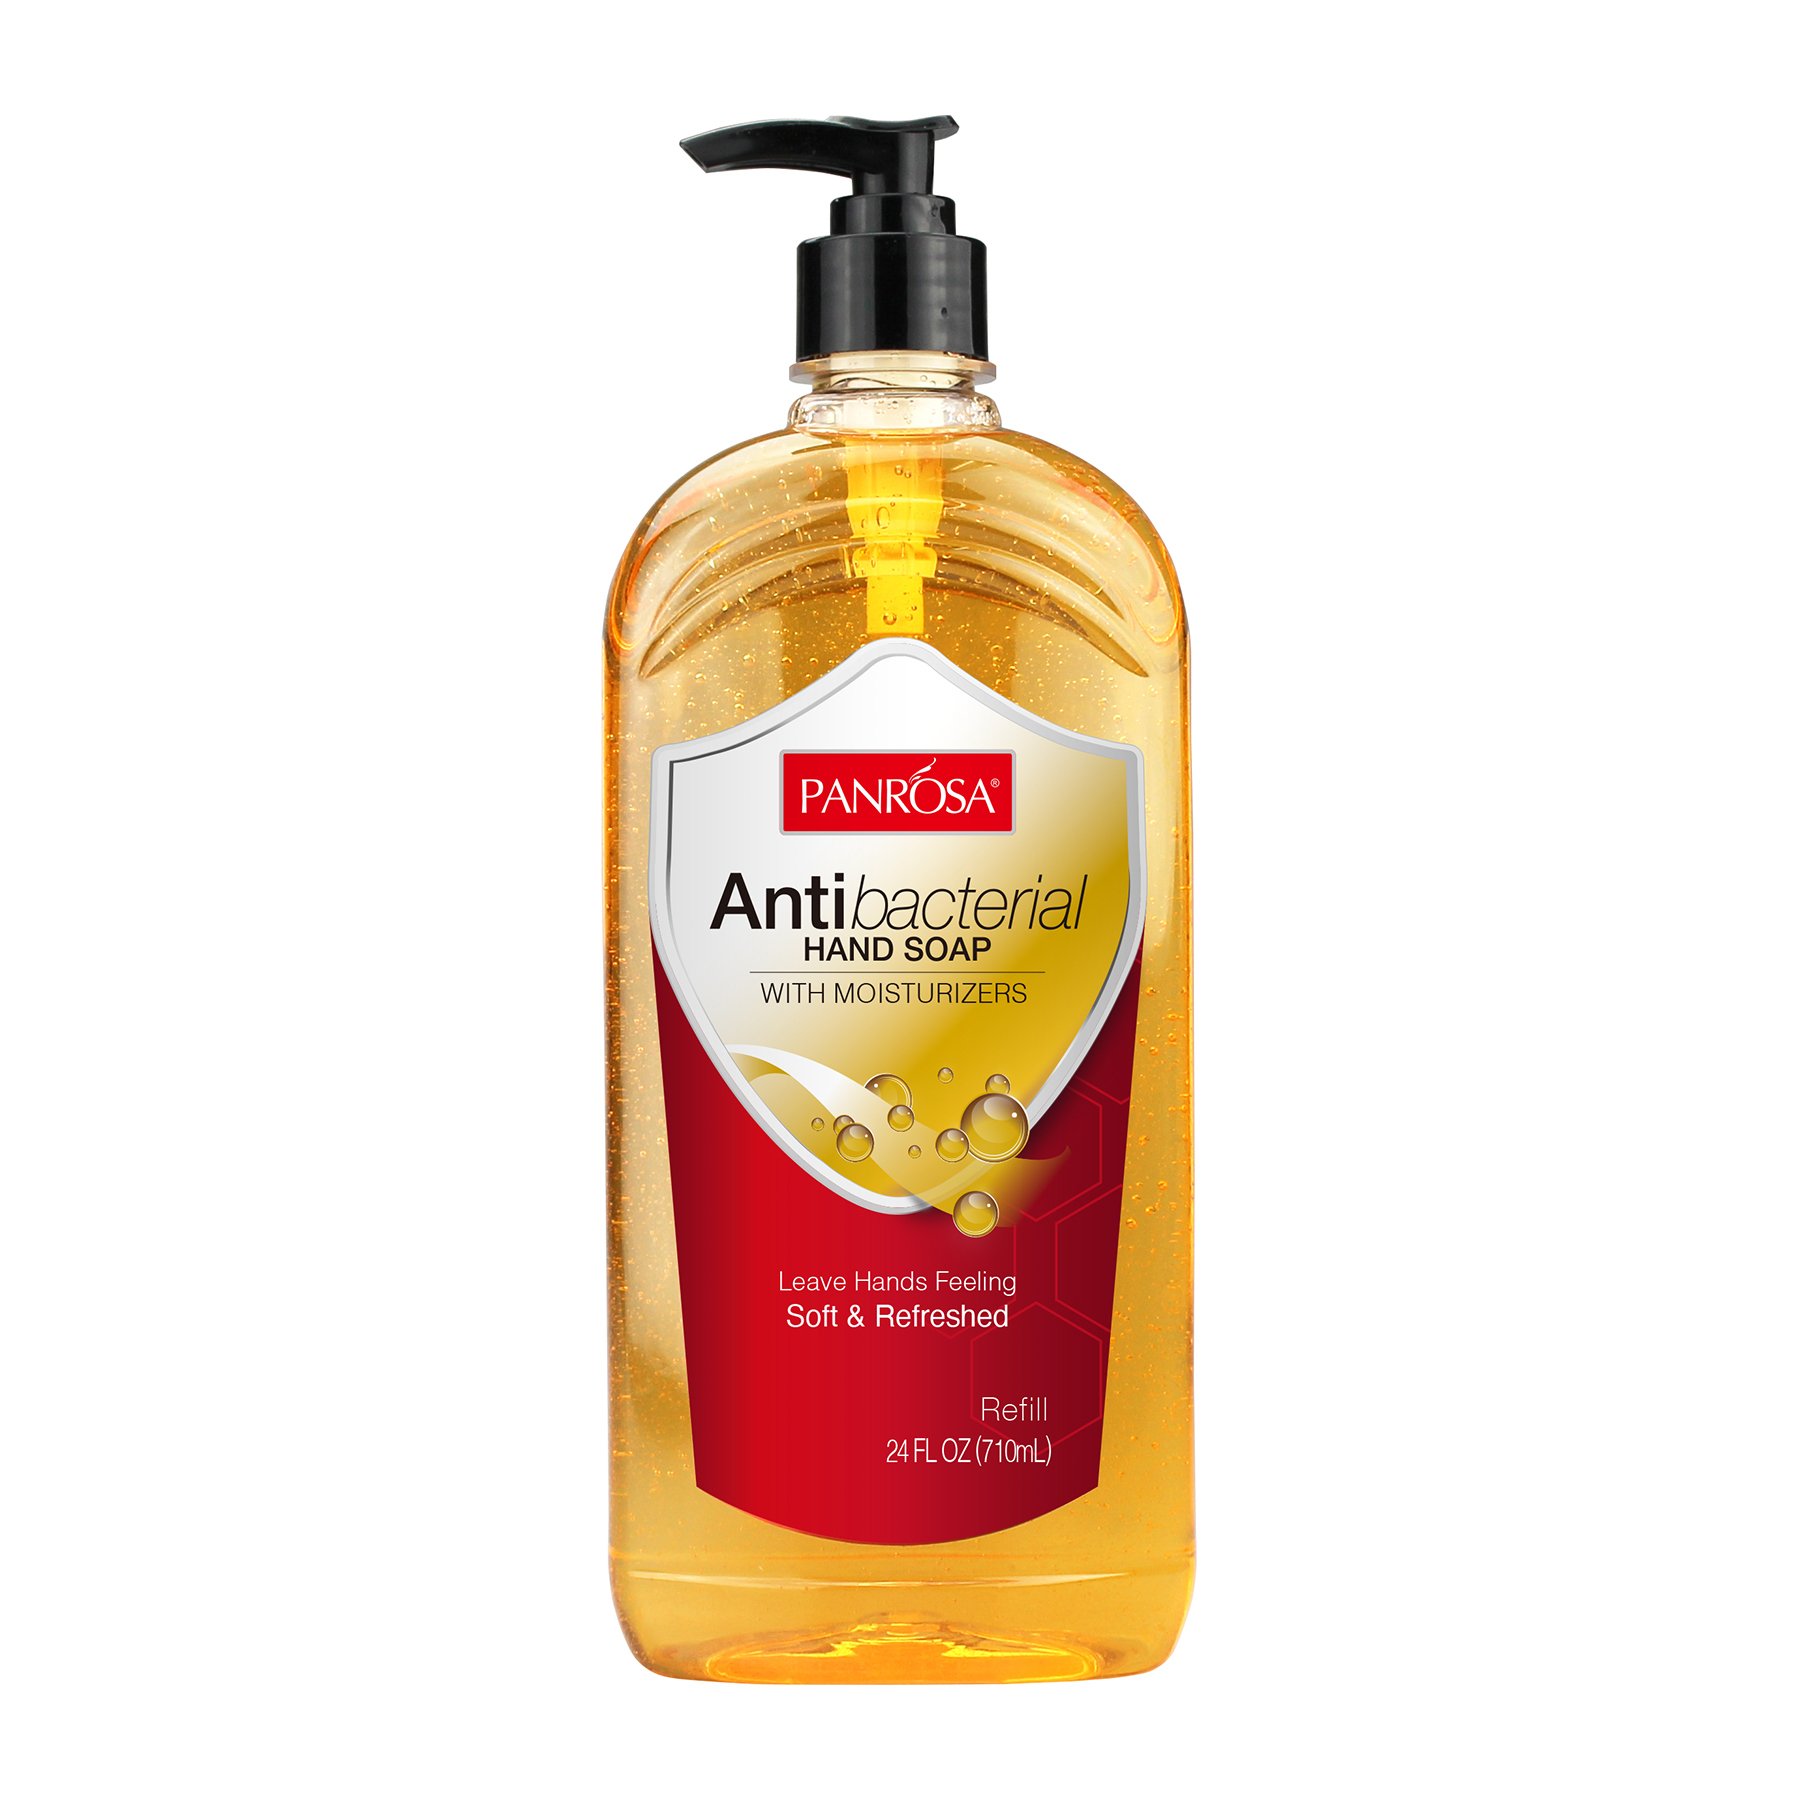 Panrosa Antibacterial Hand Soap Shop Cleansers And Soaps At H E B